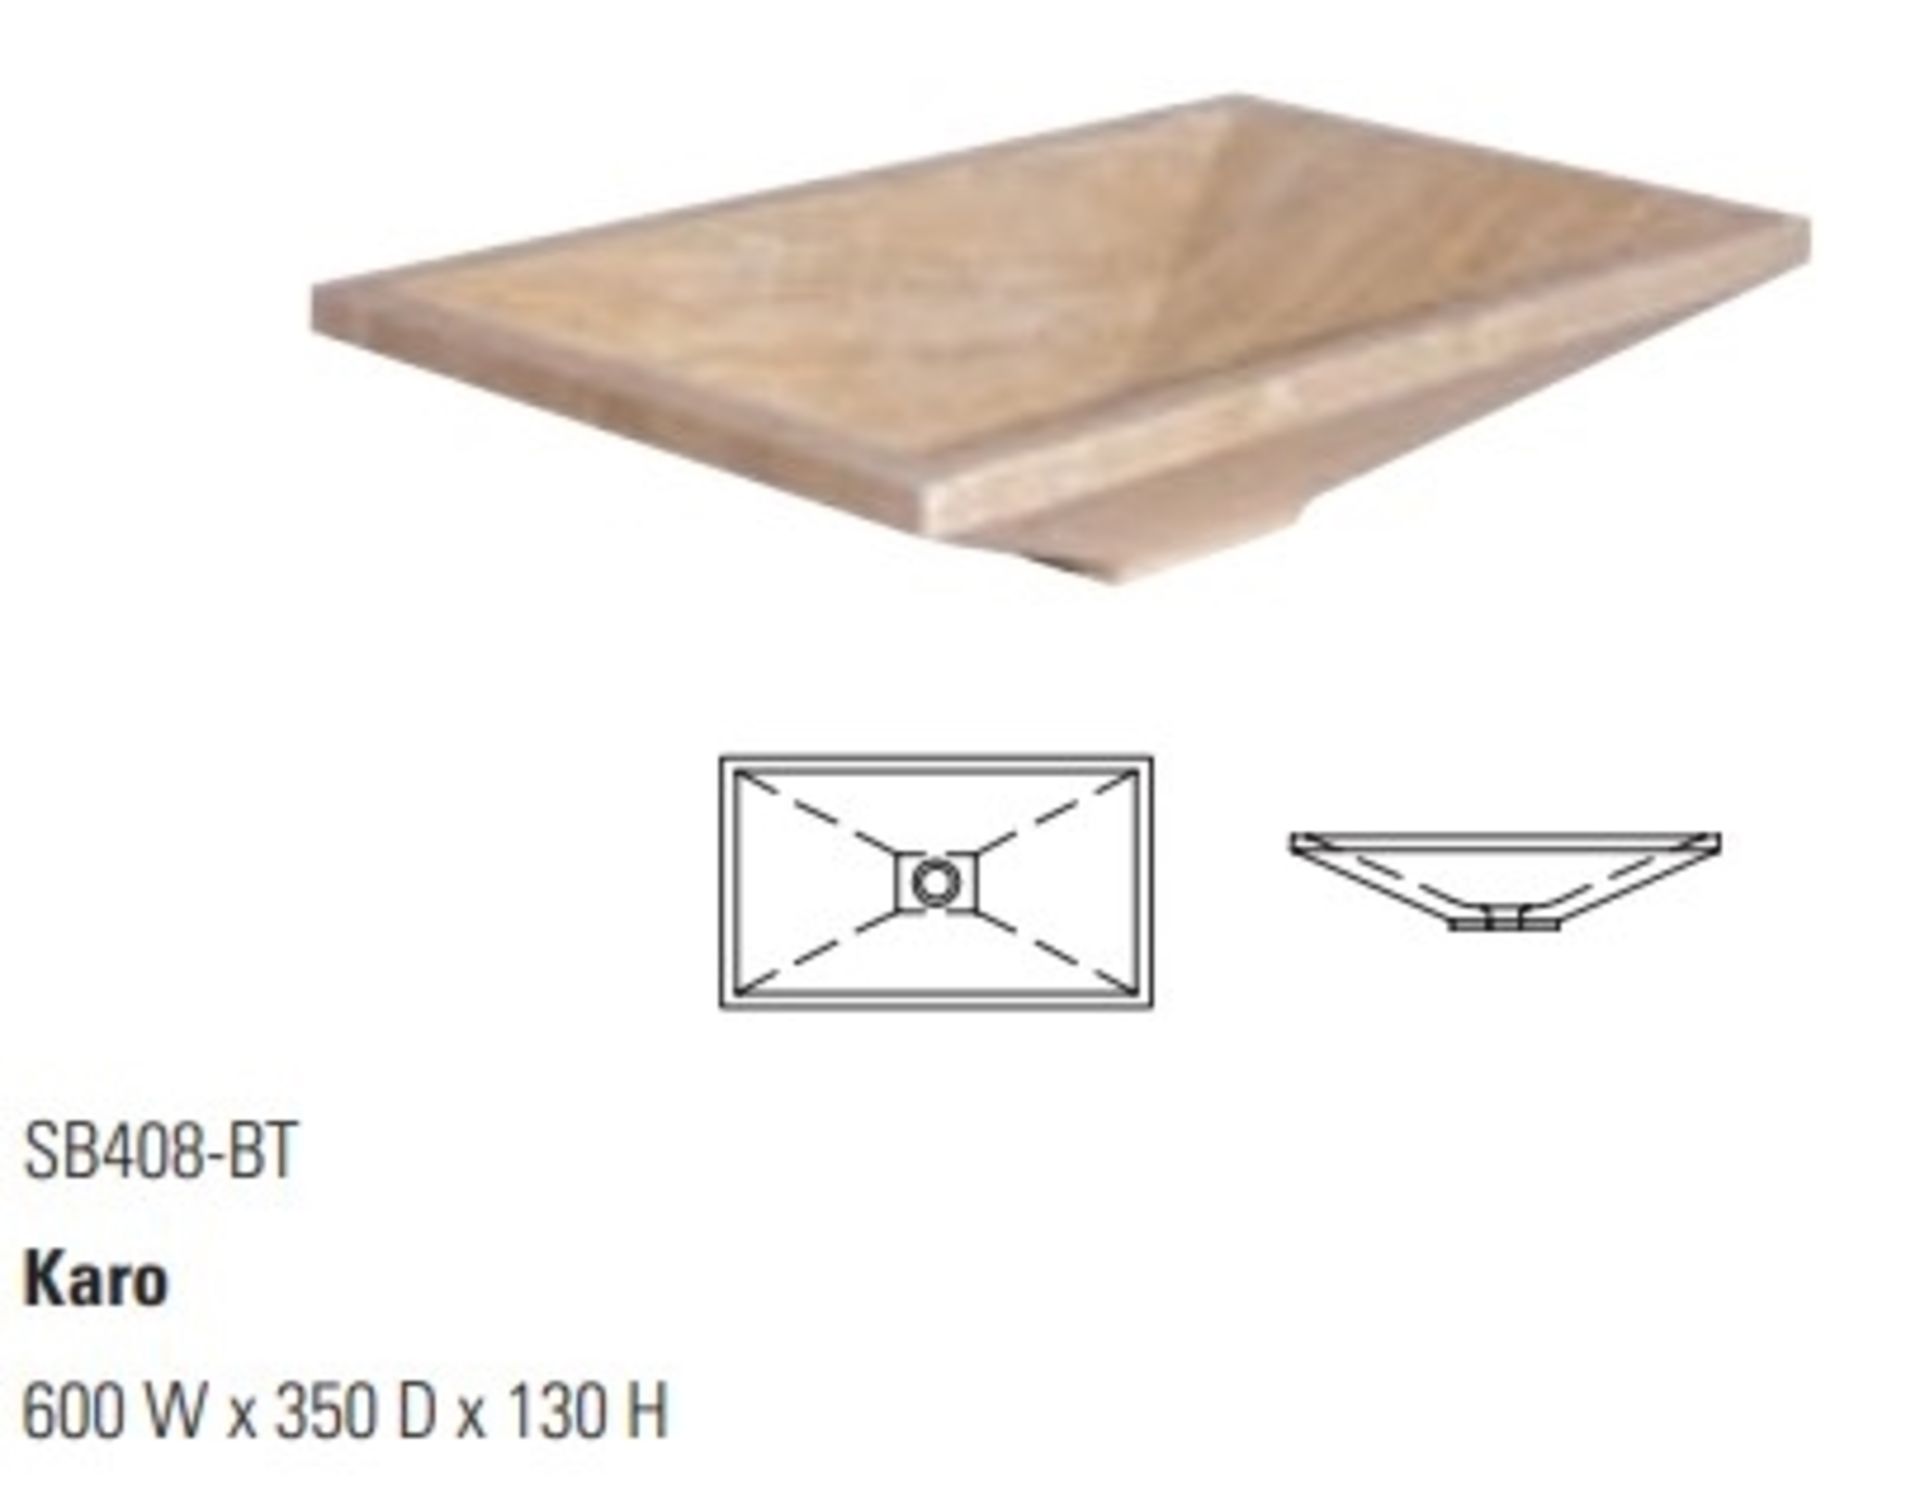 1 x Stonearth 'Karo' Solid Travertine Stone Countertop Sink Basin - New Boxed Stock - RRP £525 - - Image 8 of 8